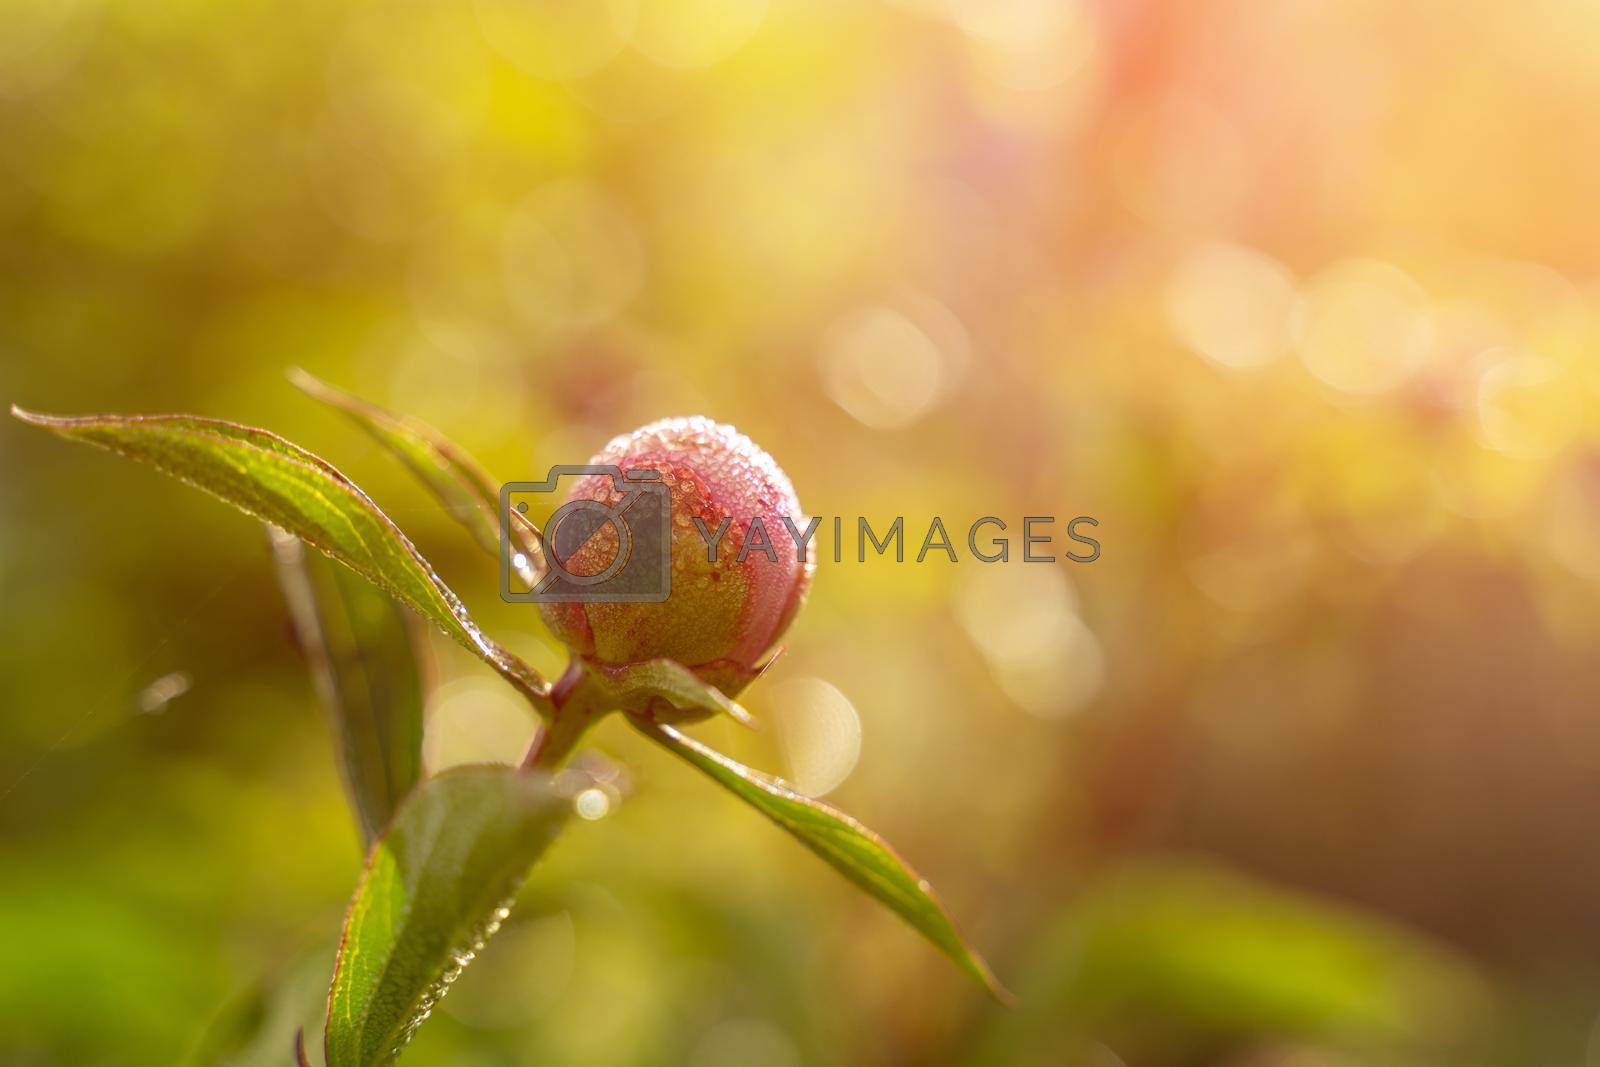 Royalty free image of Purple pink peony flower Bud opens with a heart-shaped petal in sunlight with dew drops on the Bud and leaves. Blurred background by Matiunina